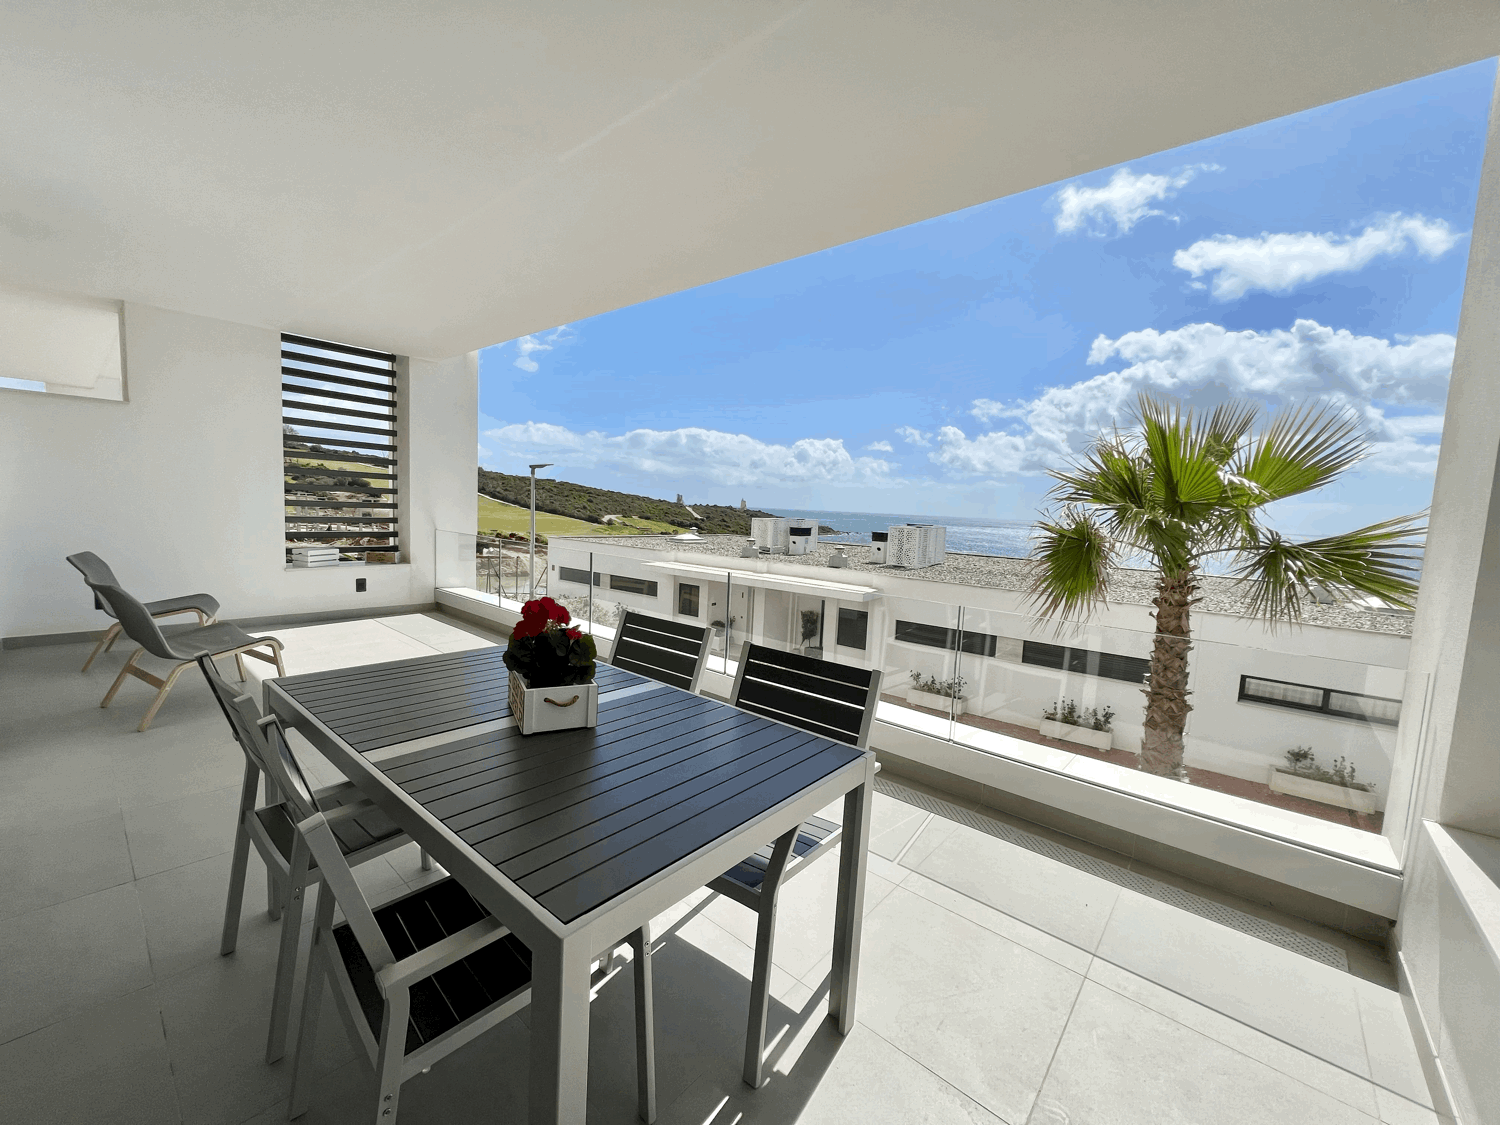 Exclusive two-bedroom apartment on the beachfront and golf course